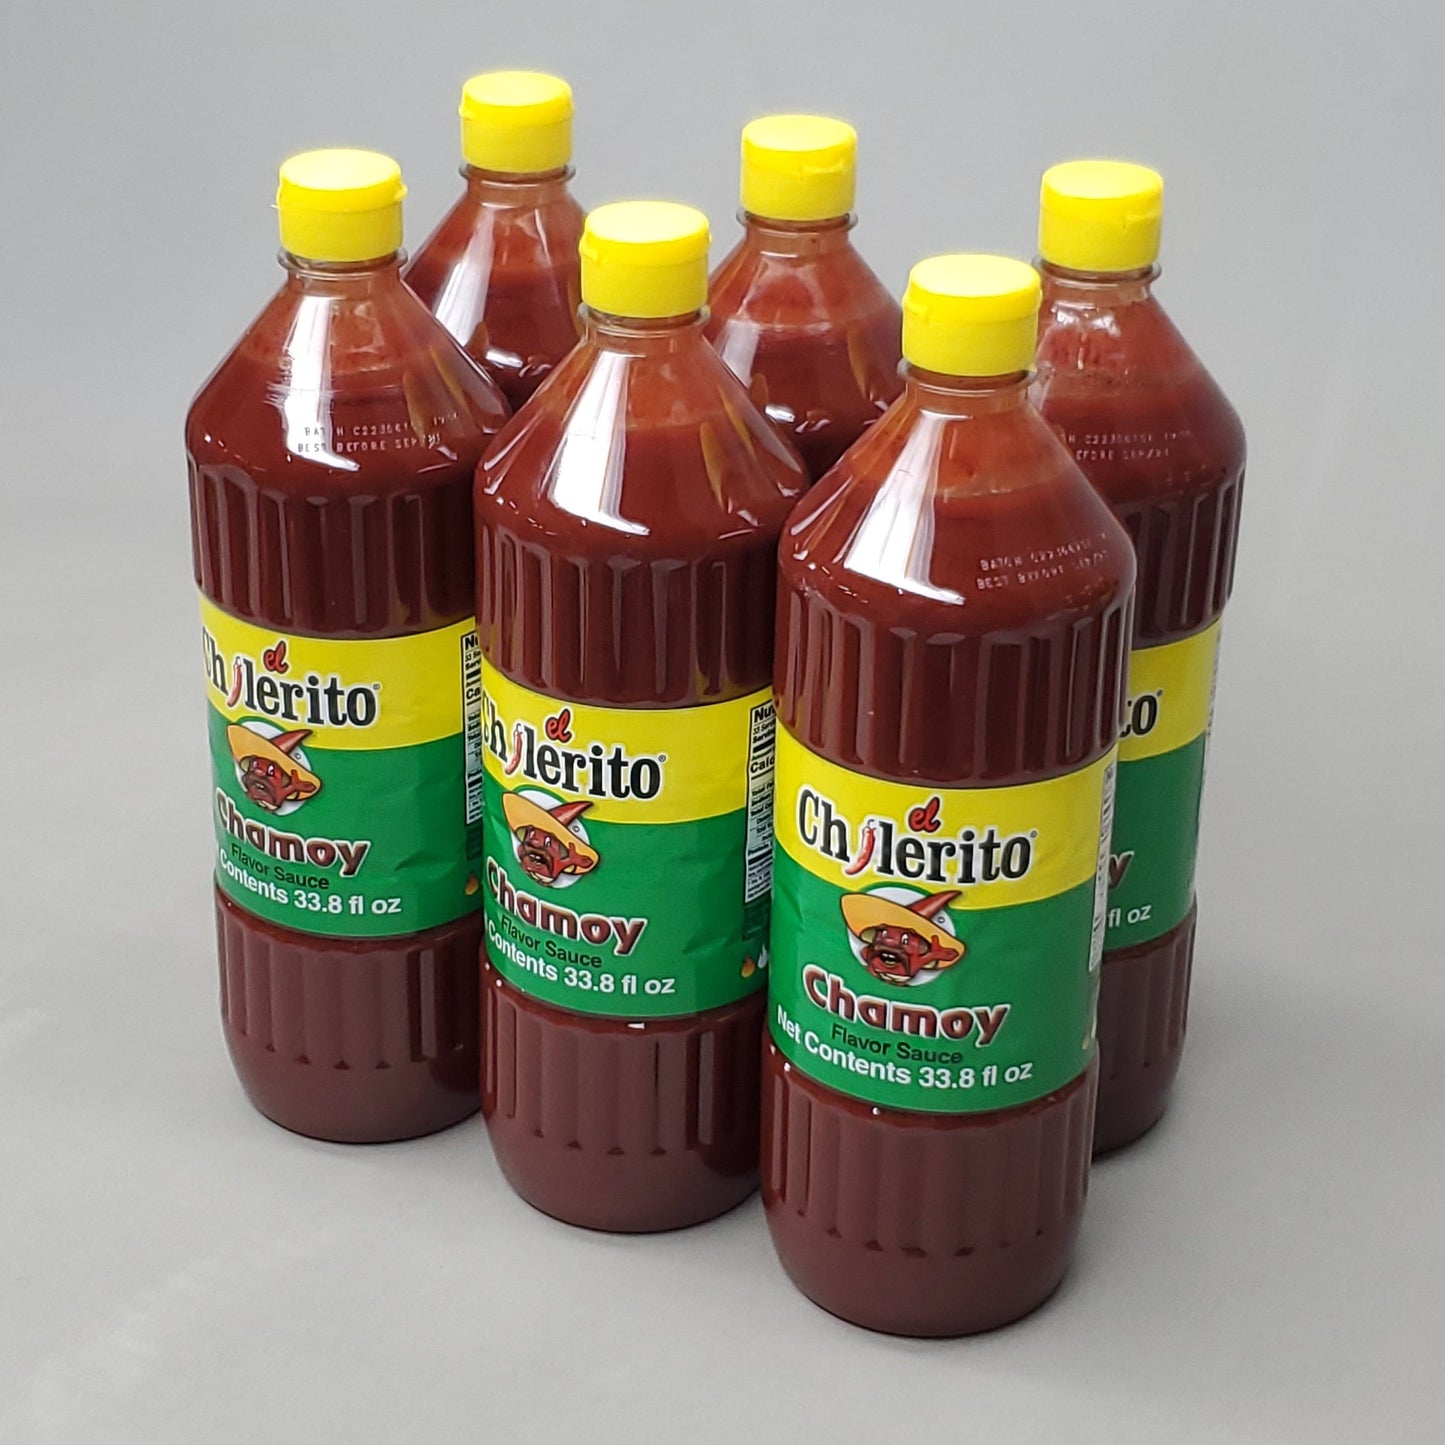 EL CHILERITO Chamoy Flavor Mild Hot Sauce 33.8 fl oz - 12x ct. Best By: 9/23 Shelf Stable (As-Is)